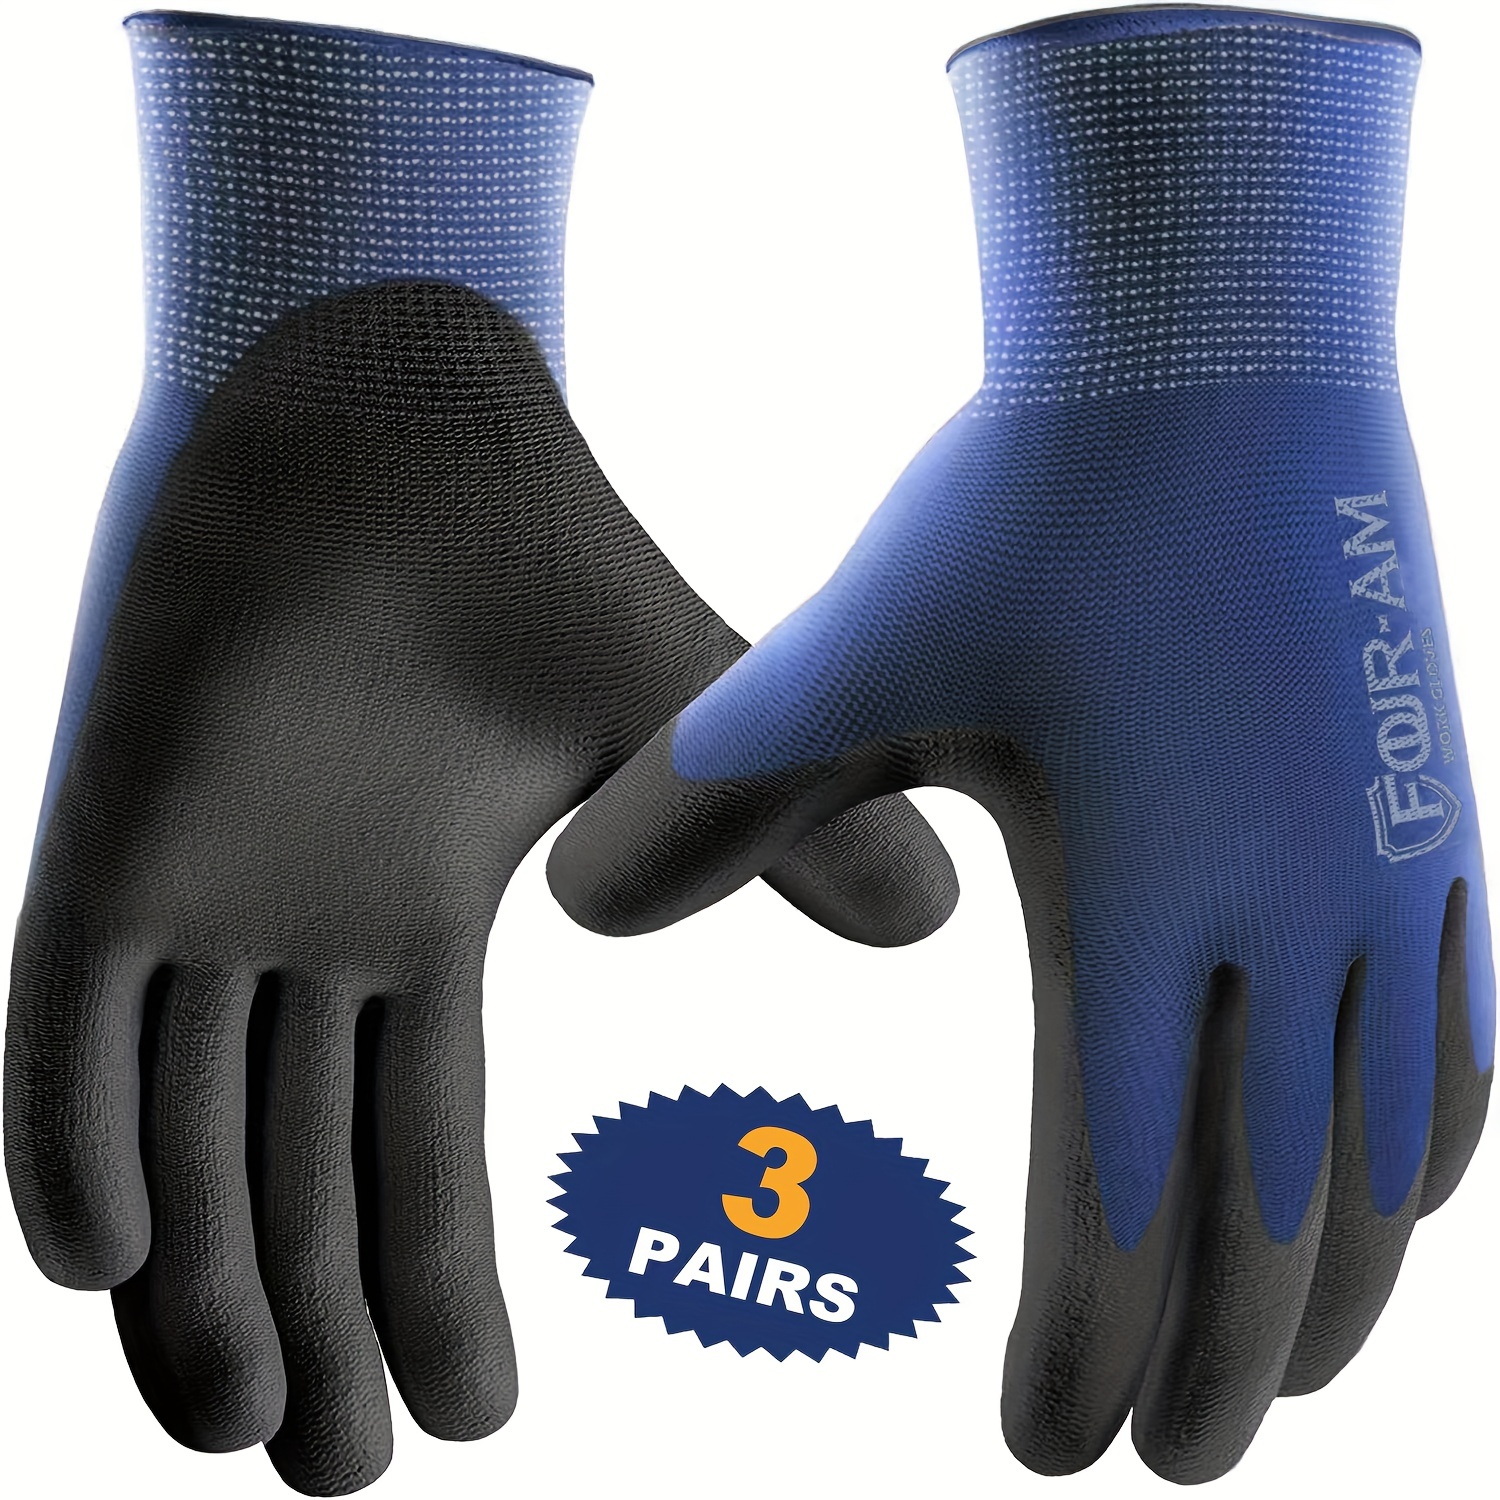 

1/ 3pairs Ultra-thin Pu Coated Work Gloves, Excellent Grip Gloves, Nylon Black Polyurethane Coated Safety Work Gloves, Knit Wrist Cuff, Ideal For Light Duty Work